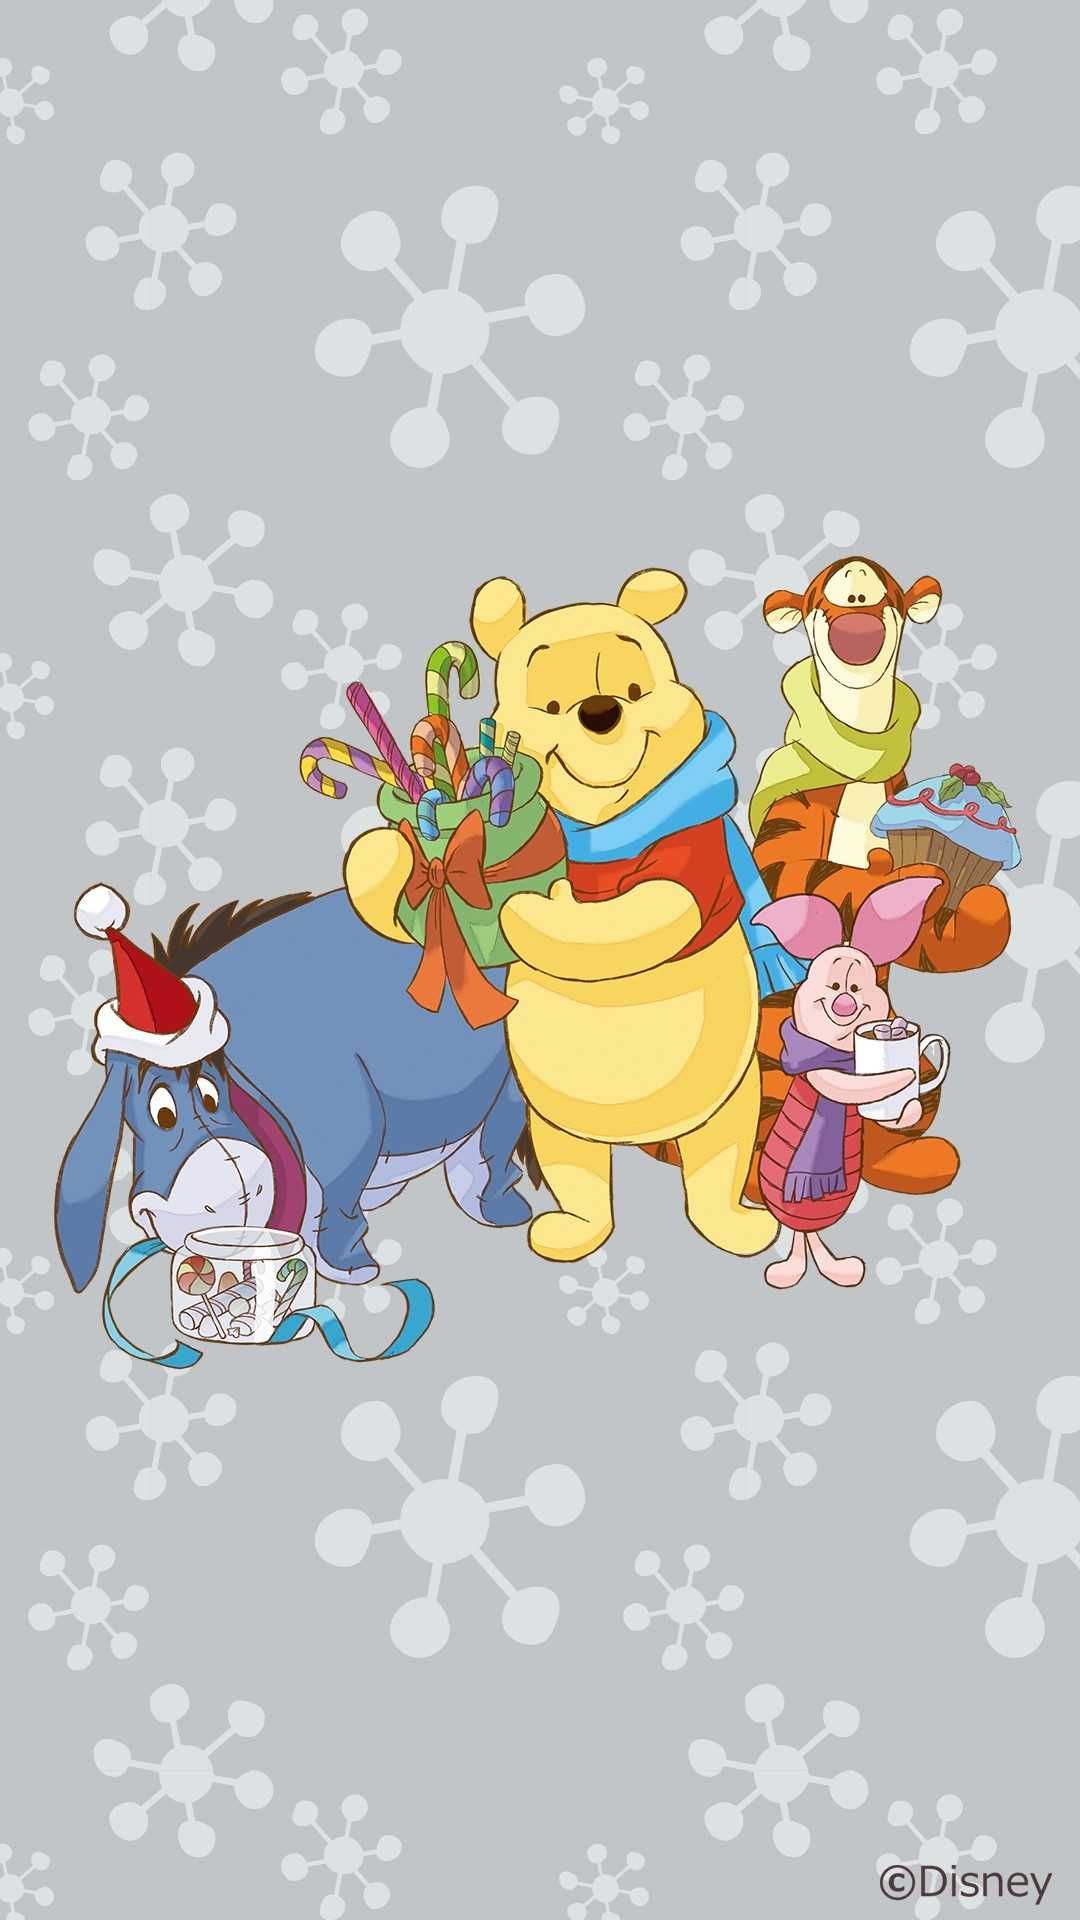 Disney wallpaper browse disney wallpaper with collections of aesthetic cute desktop disneâ winnie the pooh pictures winnie the pooh christmas winnie the pooh